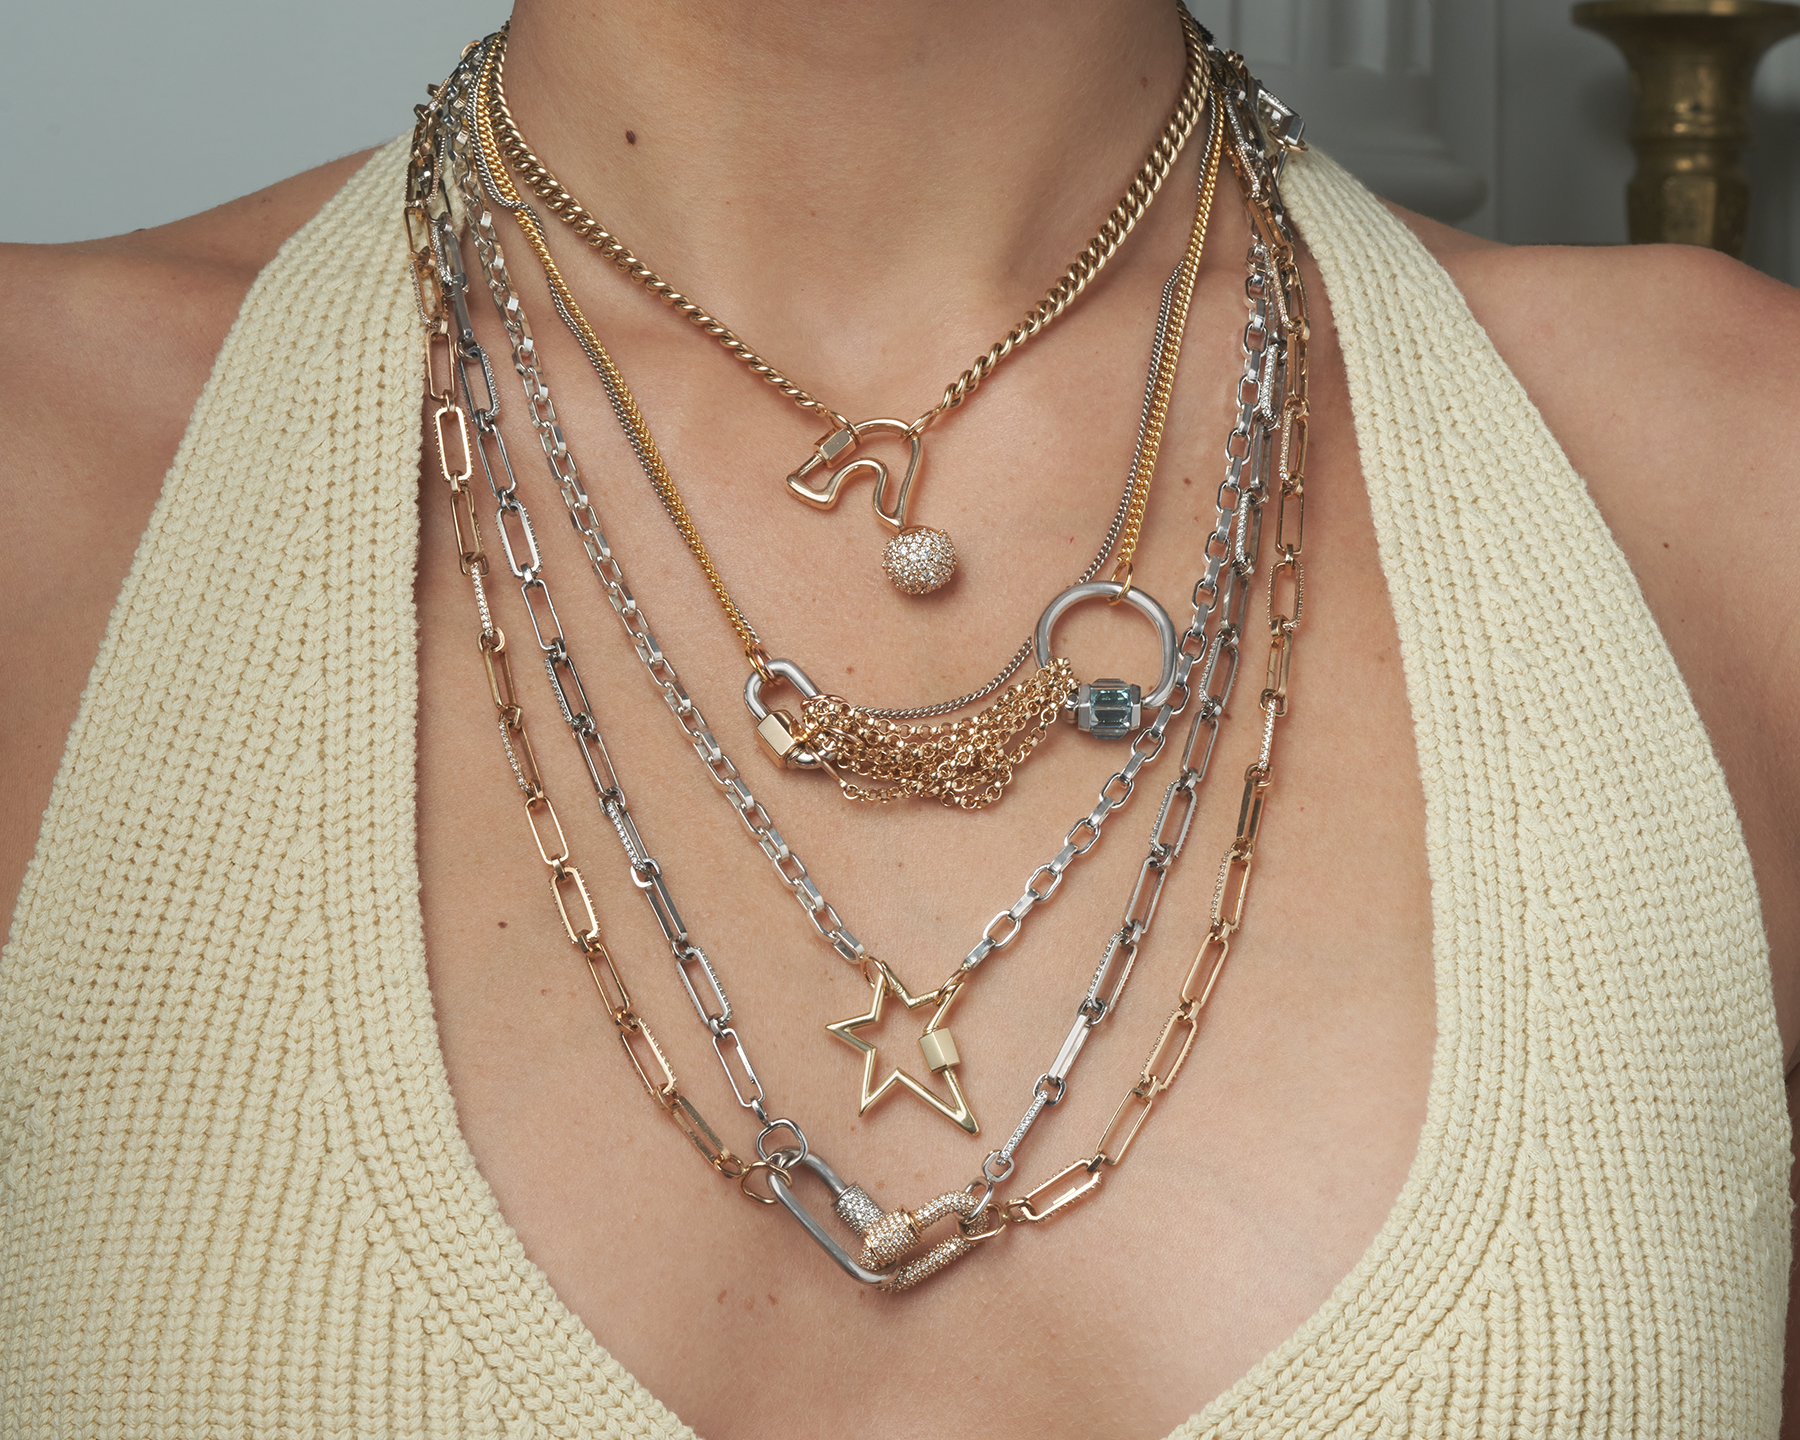 Close up of woman's decolletage wearing multiple necklaces including necklace with diamond lock charm